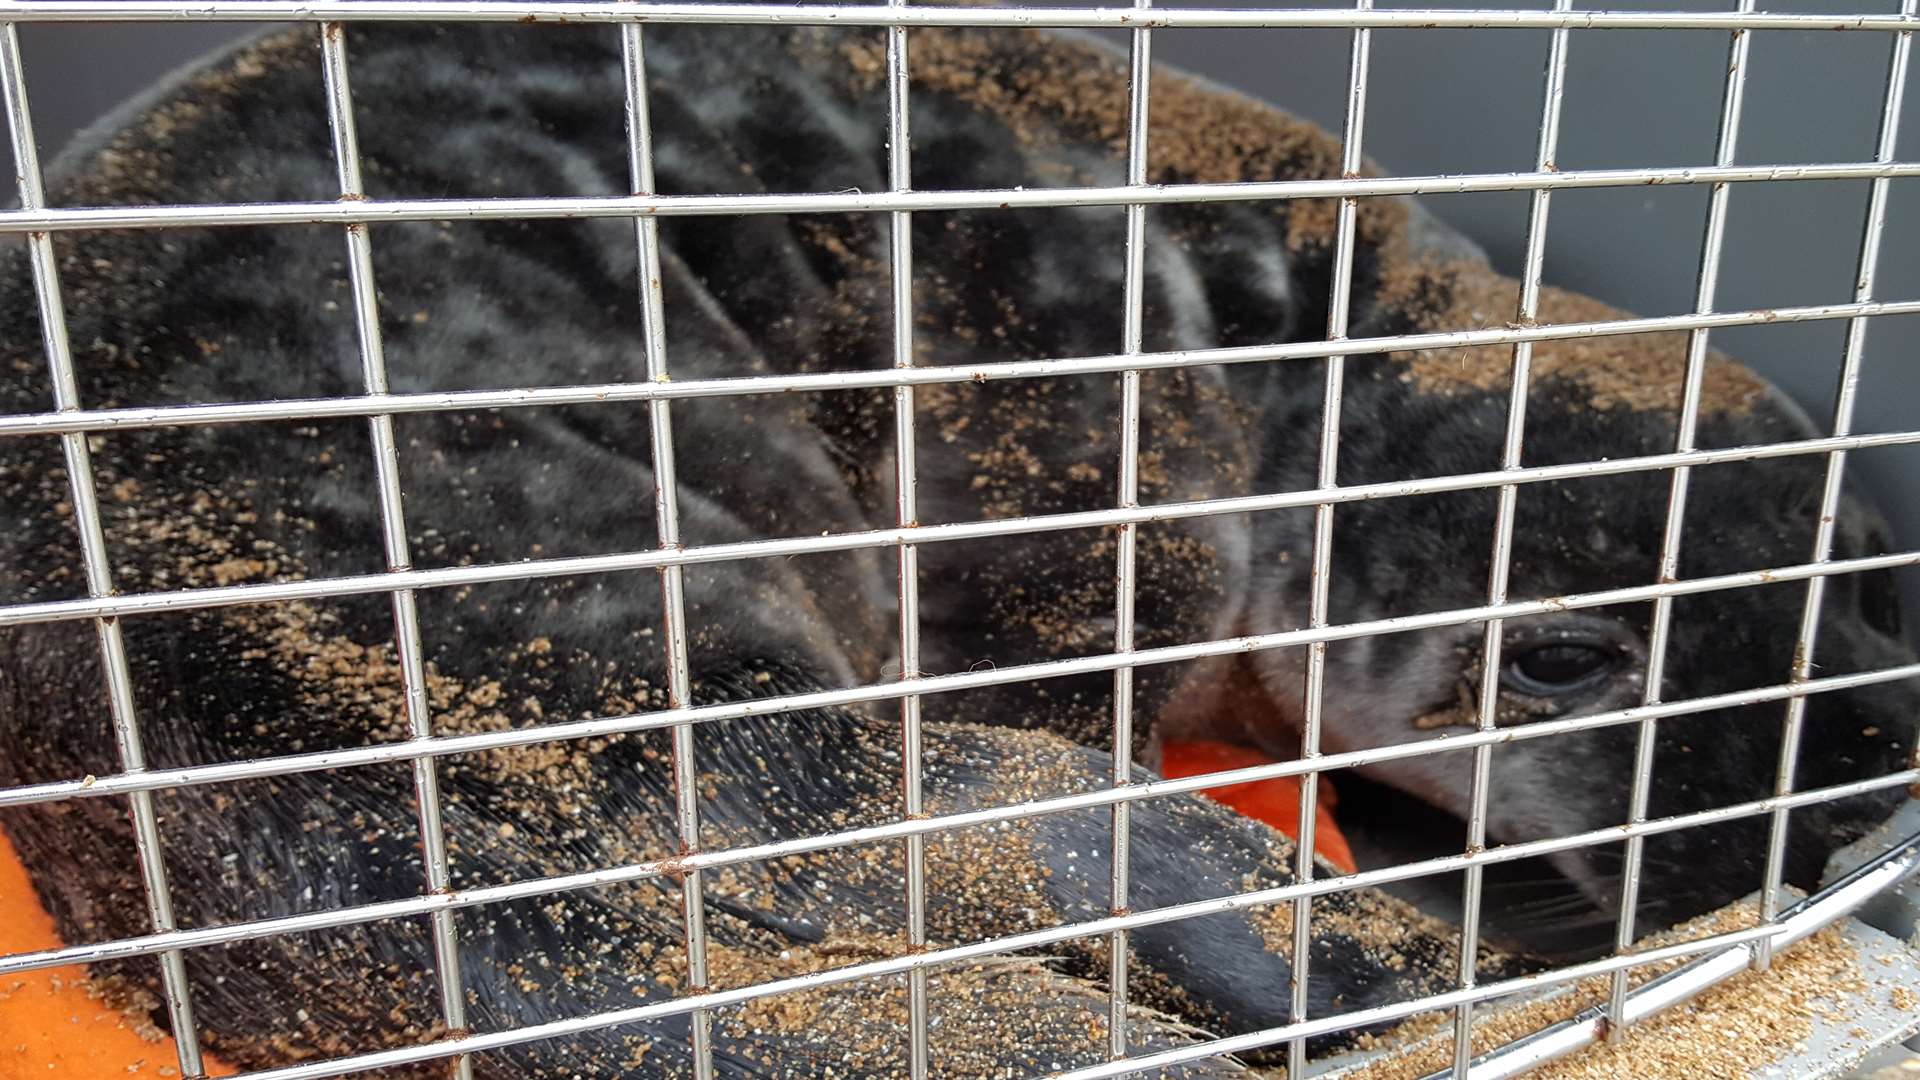 This seal pup had to be rescued yesterday. Pic: RSPCA